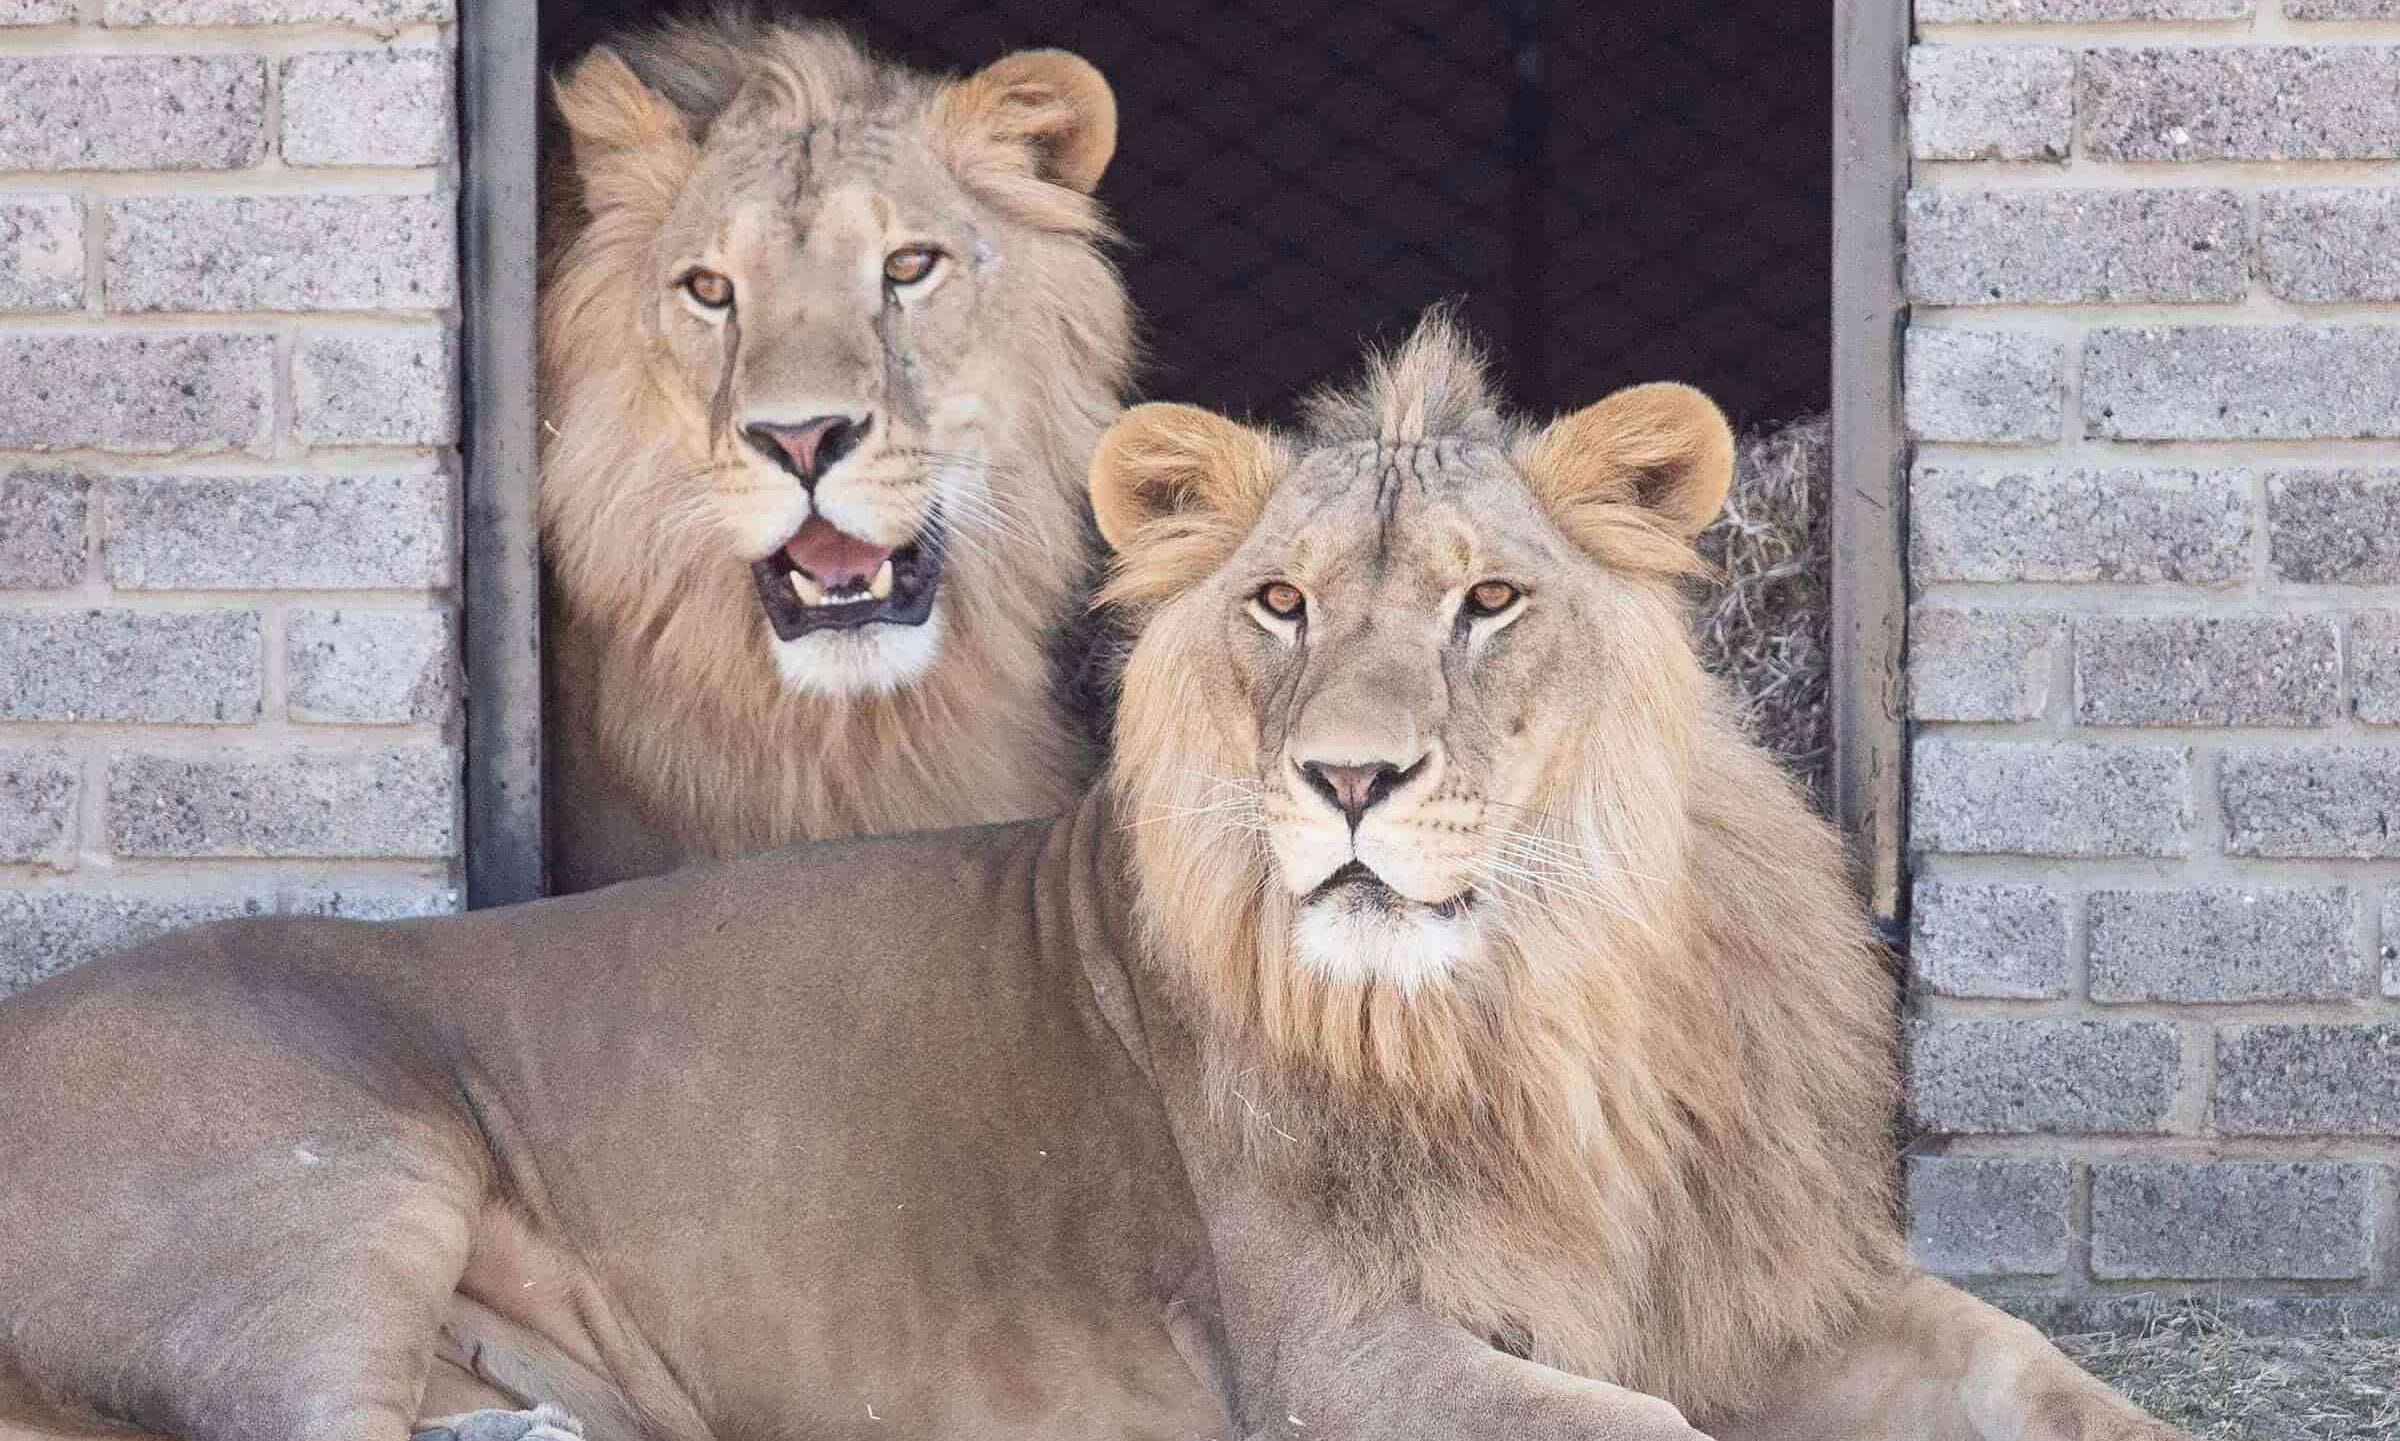 Back to wild: QR Cargo flies 6 rescued lions to Joburg